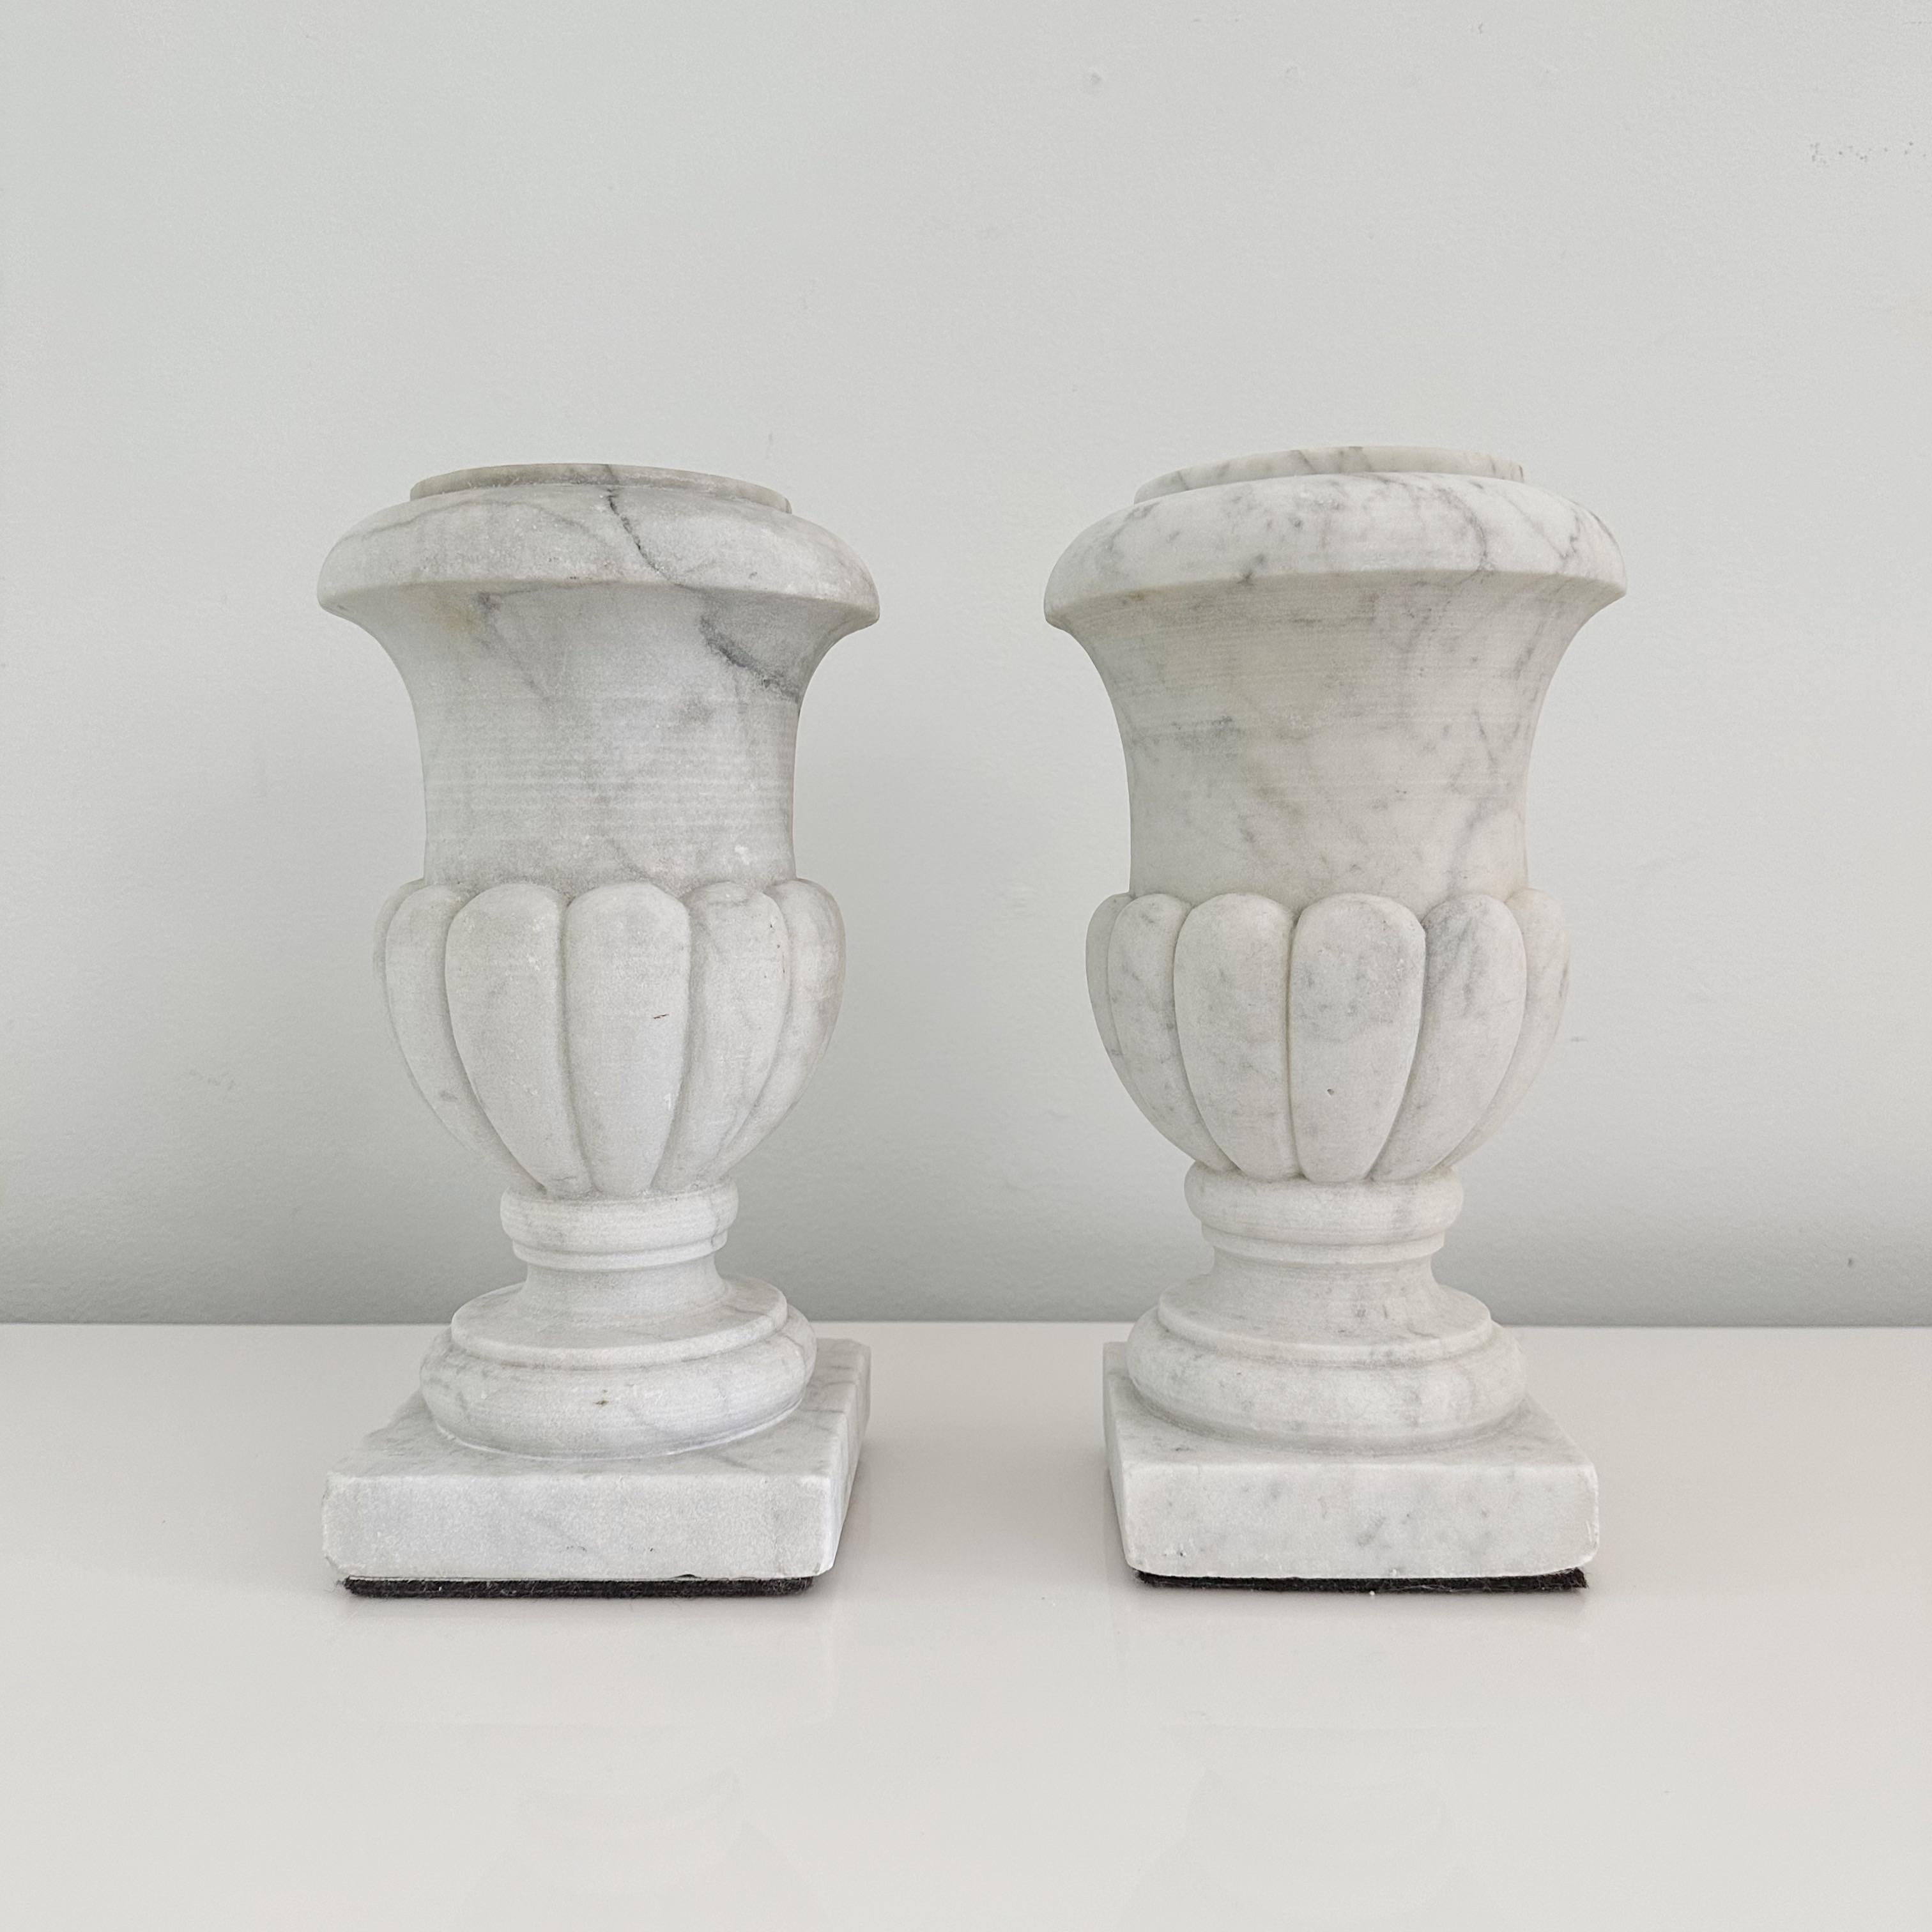 Elegant pair of hand-carved Carrara marble miniature urns, available for sale. These stunning pieces, standing at a modest height of only 12 inches, exude the grandeur and grace of the neoclassical style. Believed to originate from early